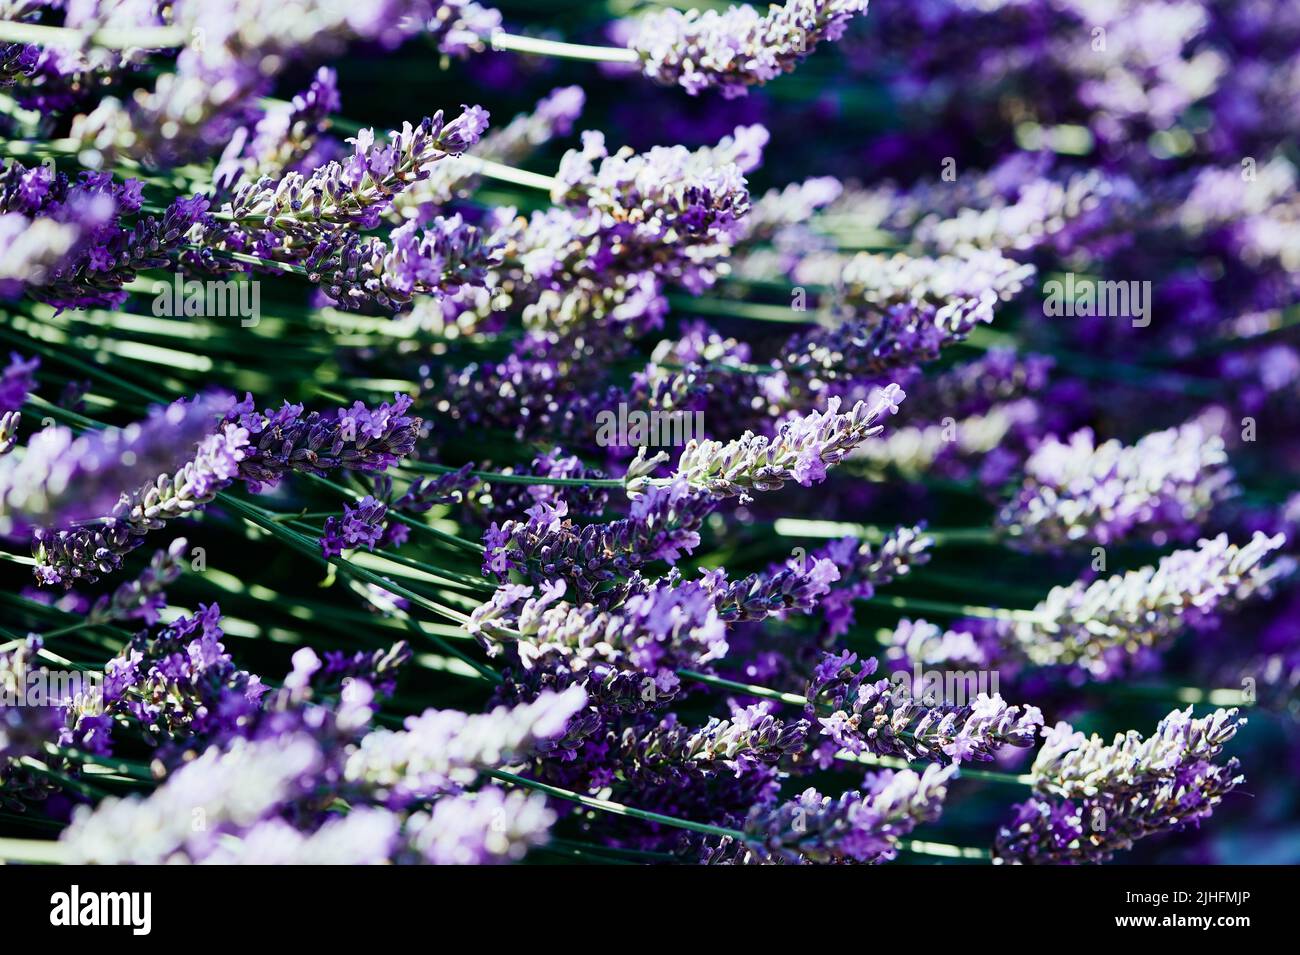 Lavender flowers close up taken in sunshine as image background Stock Photo